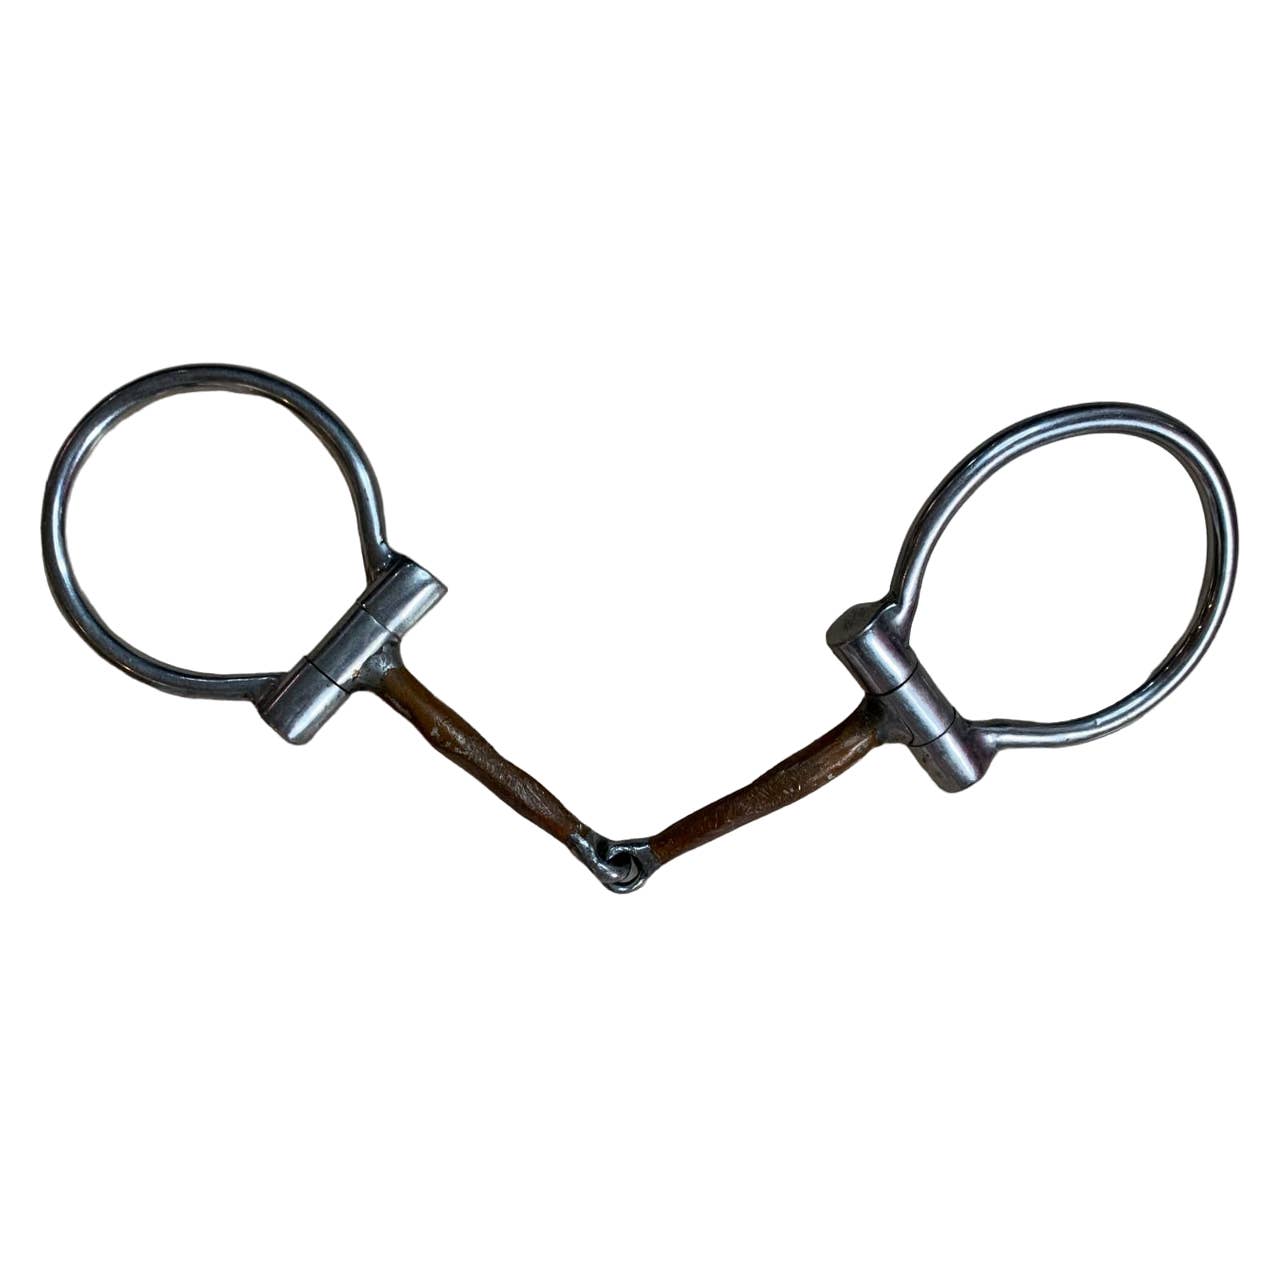 Copper Dee Ring Snaffle in Stainless Steel - 5"